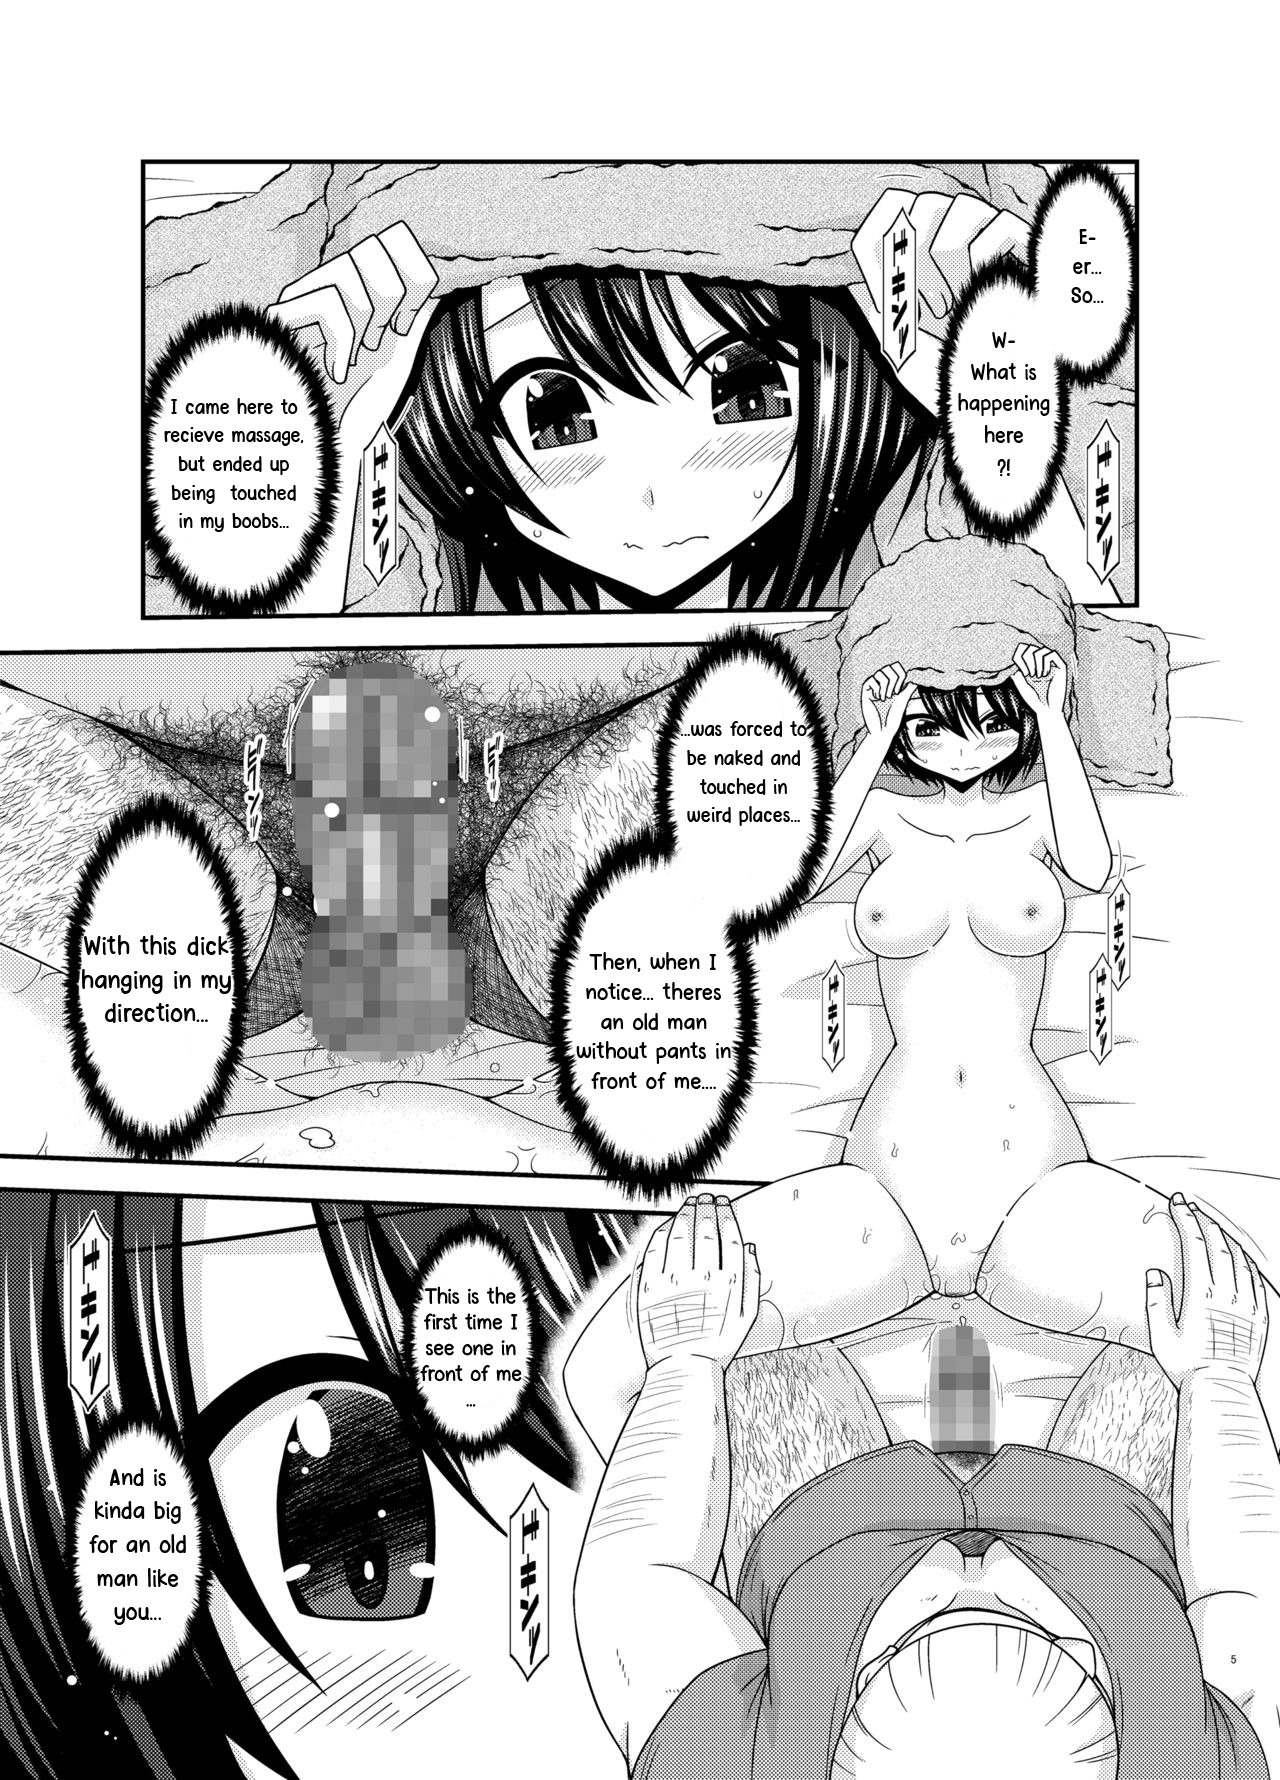 Hentai Manga Comic-The Story of a Vtuber Who Went To a Massage Parlor Only To End Up Getting Fucked After She Was Mistaken For a Boy --Chapter 2-3